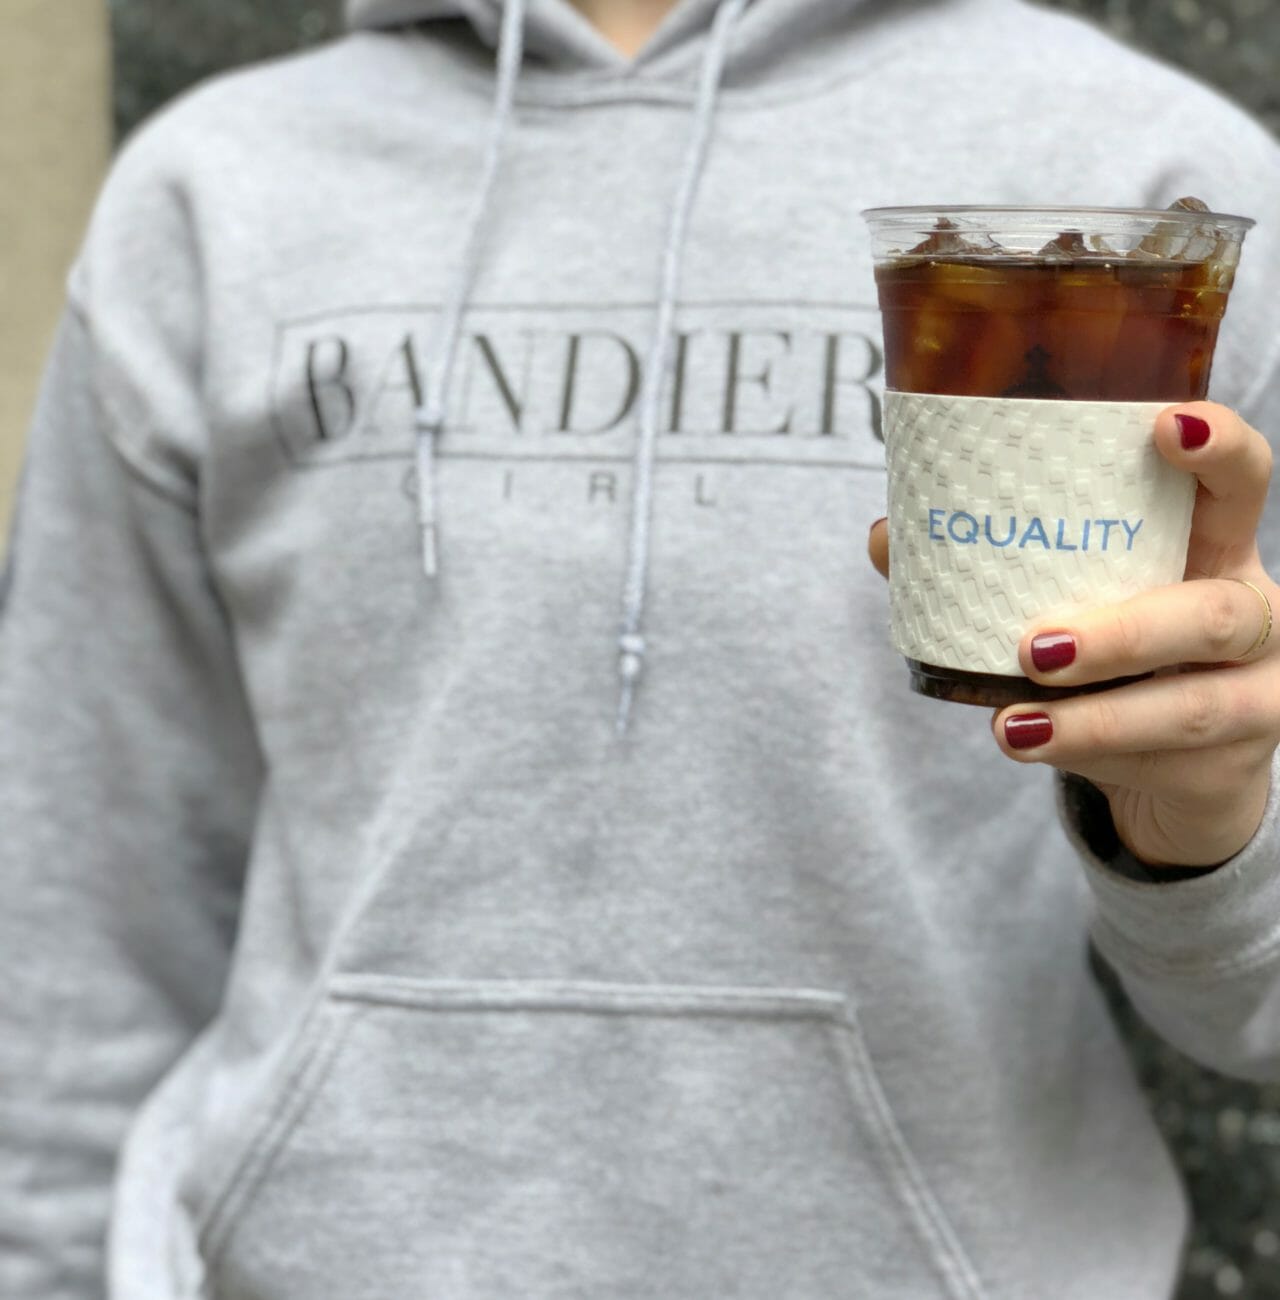 Lady in bandier sweatshirt holding cold brew with equality sleeve